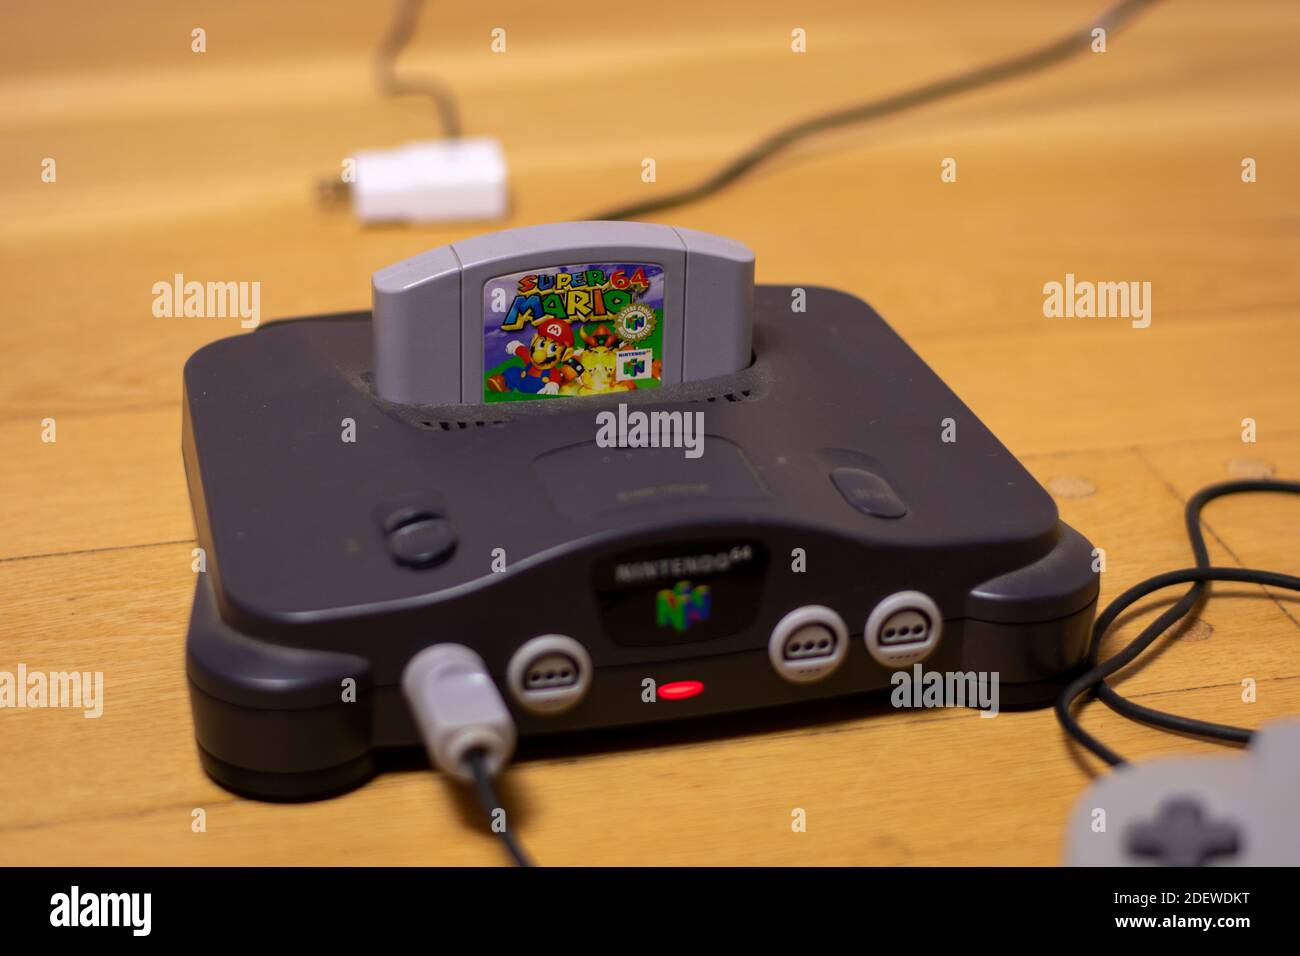 mario 64 hi-res photography images - Alamy